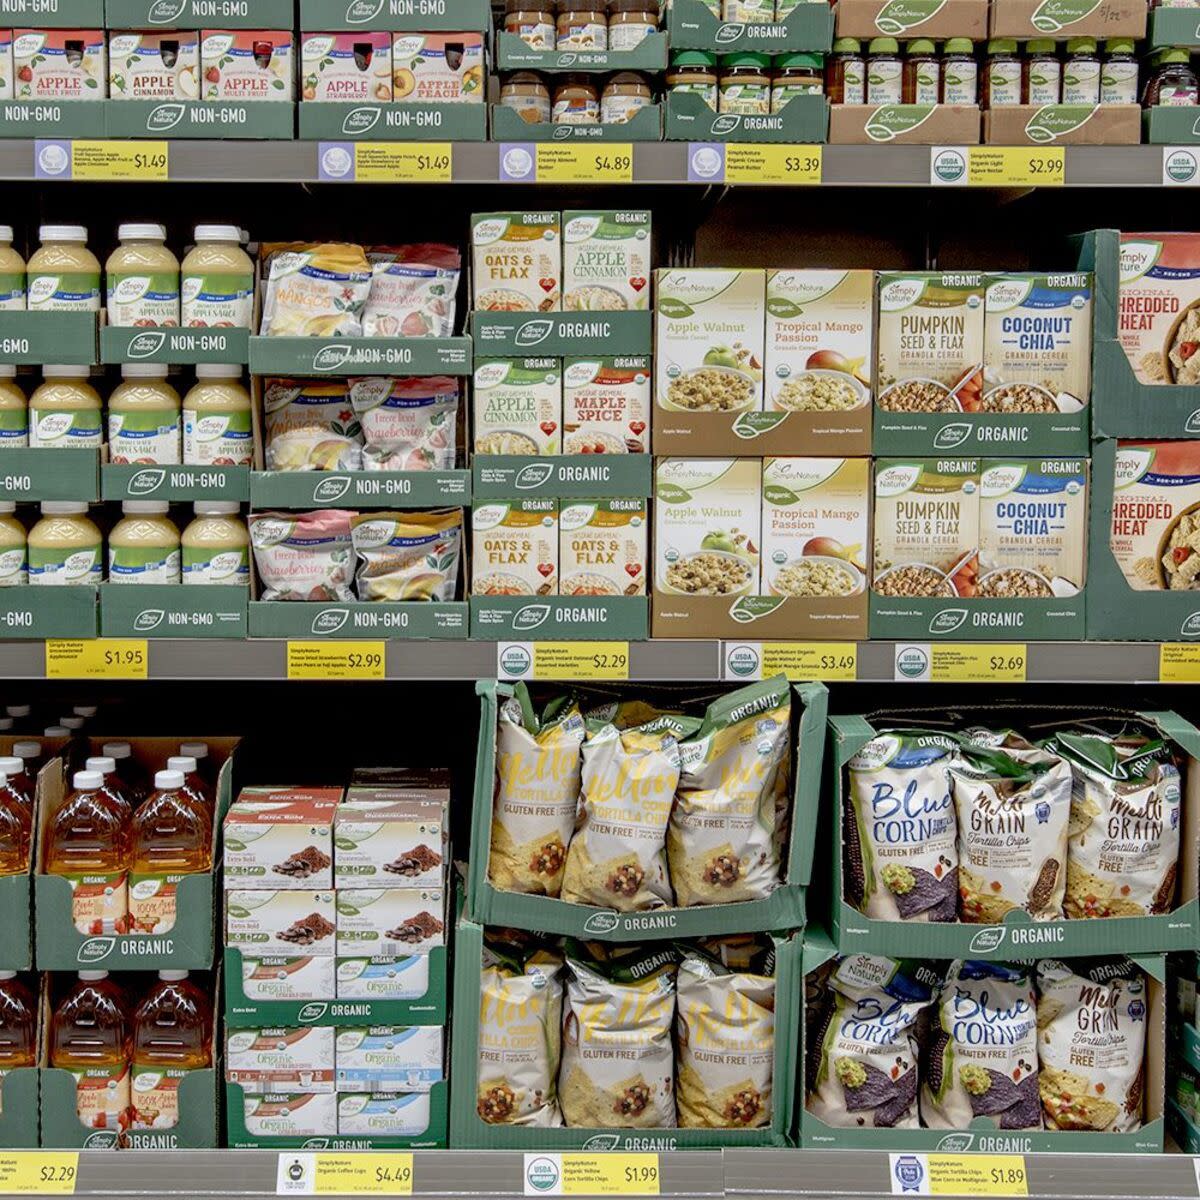 Three aisles of Aldi’s simply nature organic food items in an Aldi including chips, apple juice, oatmeal, and cereal, clean and well organized in dark green cardboard